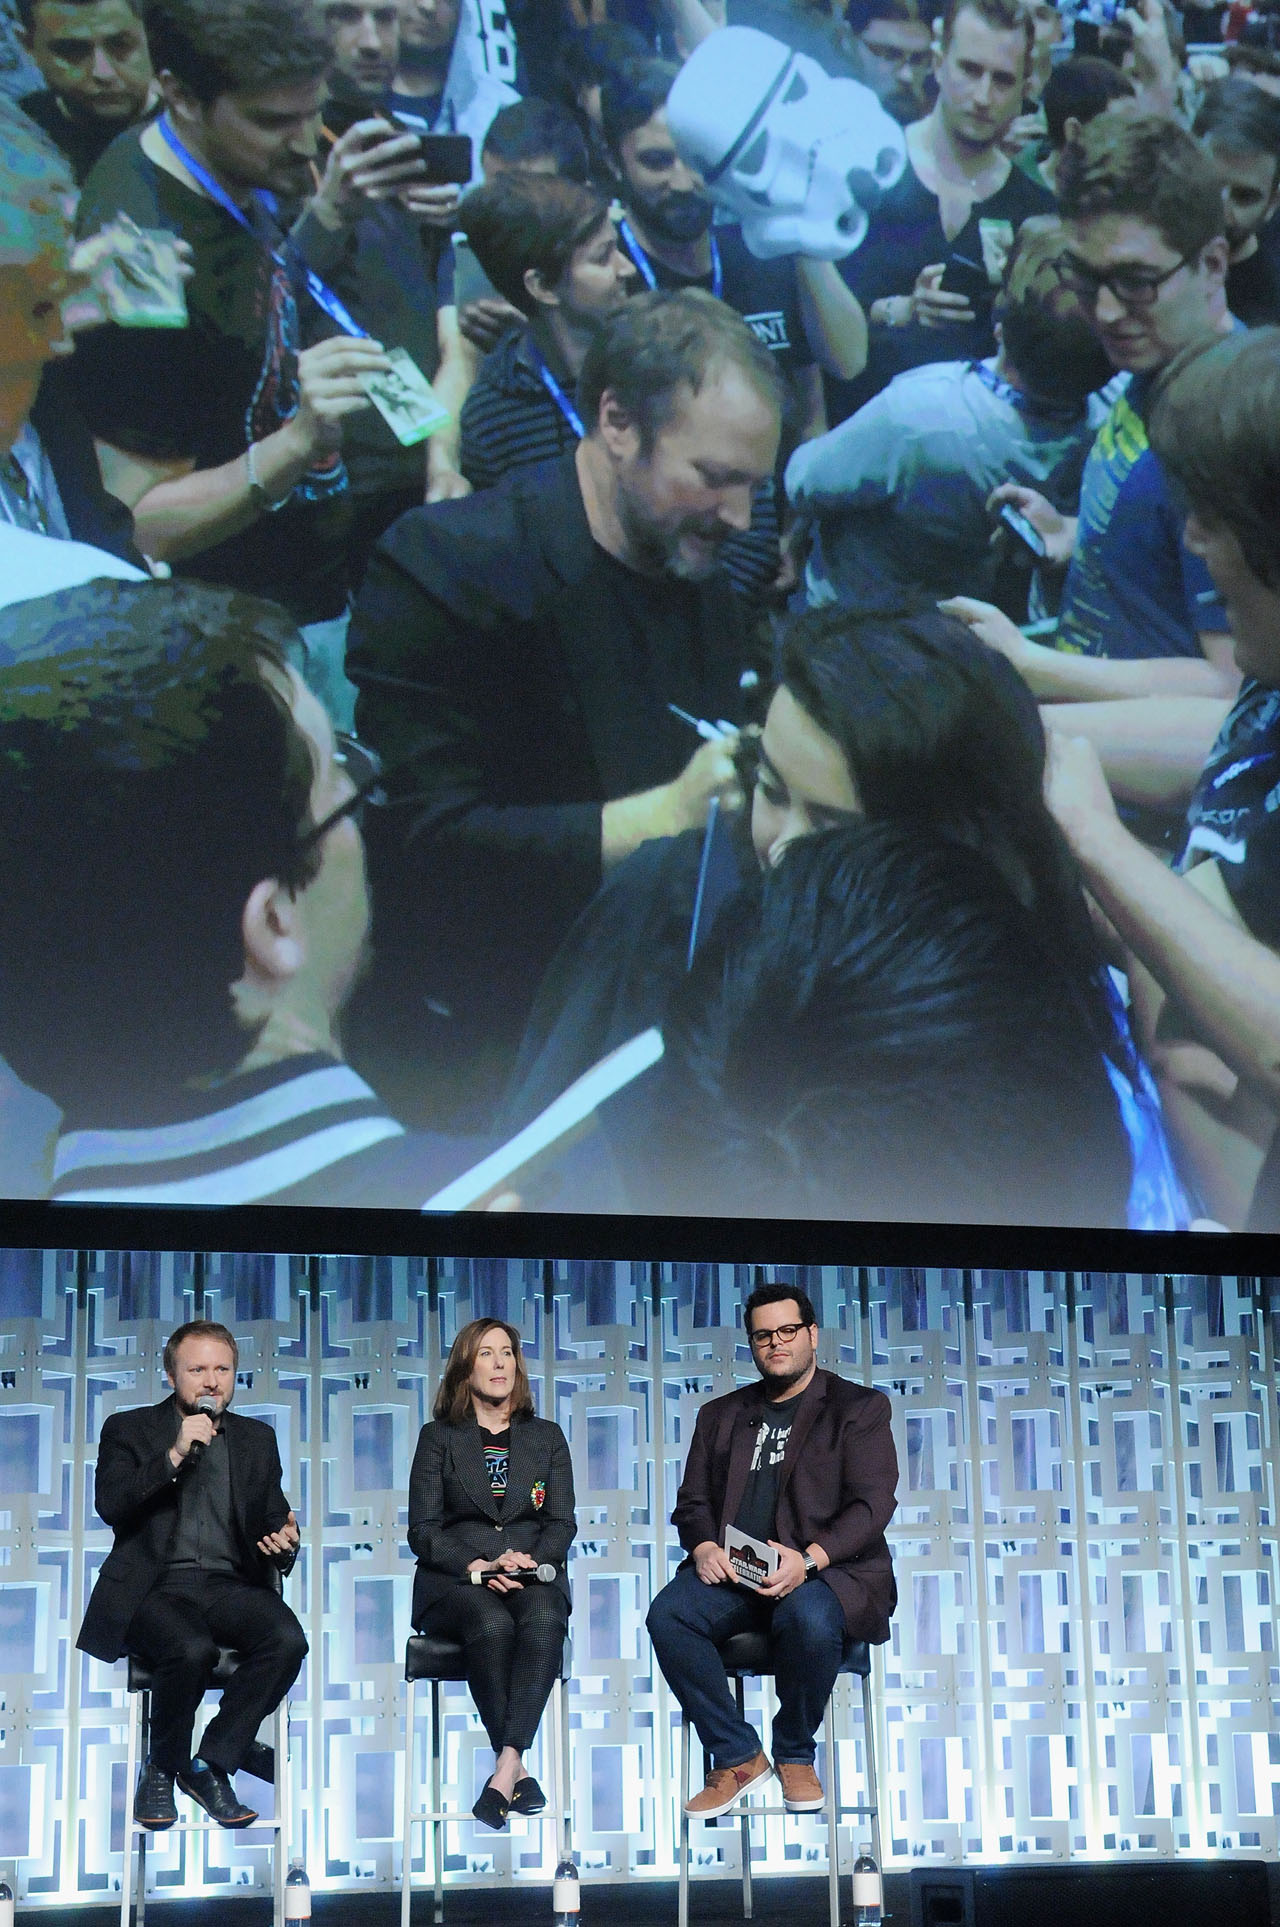 ORLANDO, FL - APRIL 14:  Rian Johnson, Kathleen Kennedy and Josh Gad attend the STAR WARS: THE LAST JEDI PANEL during the 2017 STAR WARS CELEBRATION at Orange County Convention Center on April 14, 2017 in Orlando, Florida.  (Photo by Gerardo Mora/Getty Images for Disney) *** Local Caption *** Rian Johnson;Kathleen Kennedy;Josh Gad